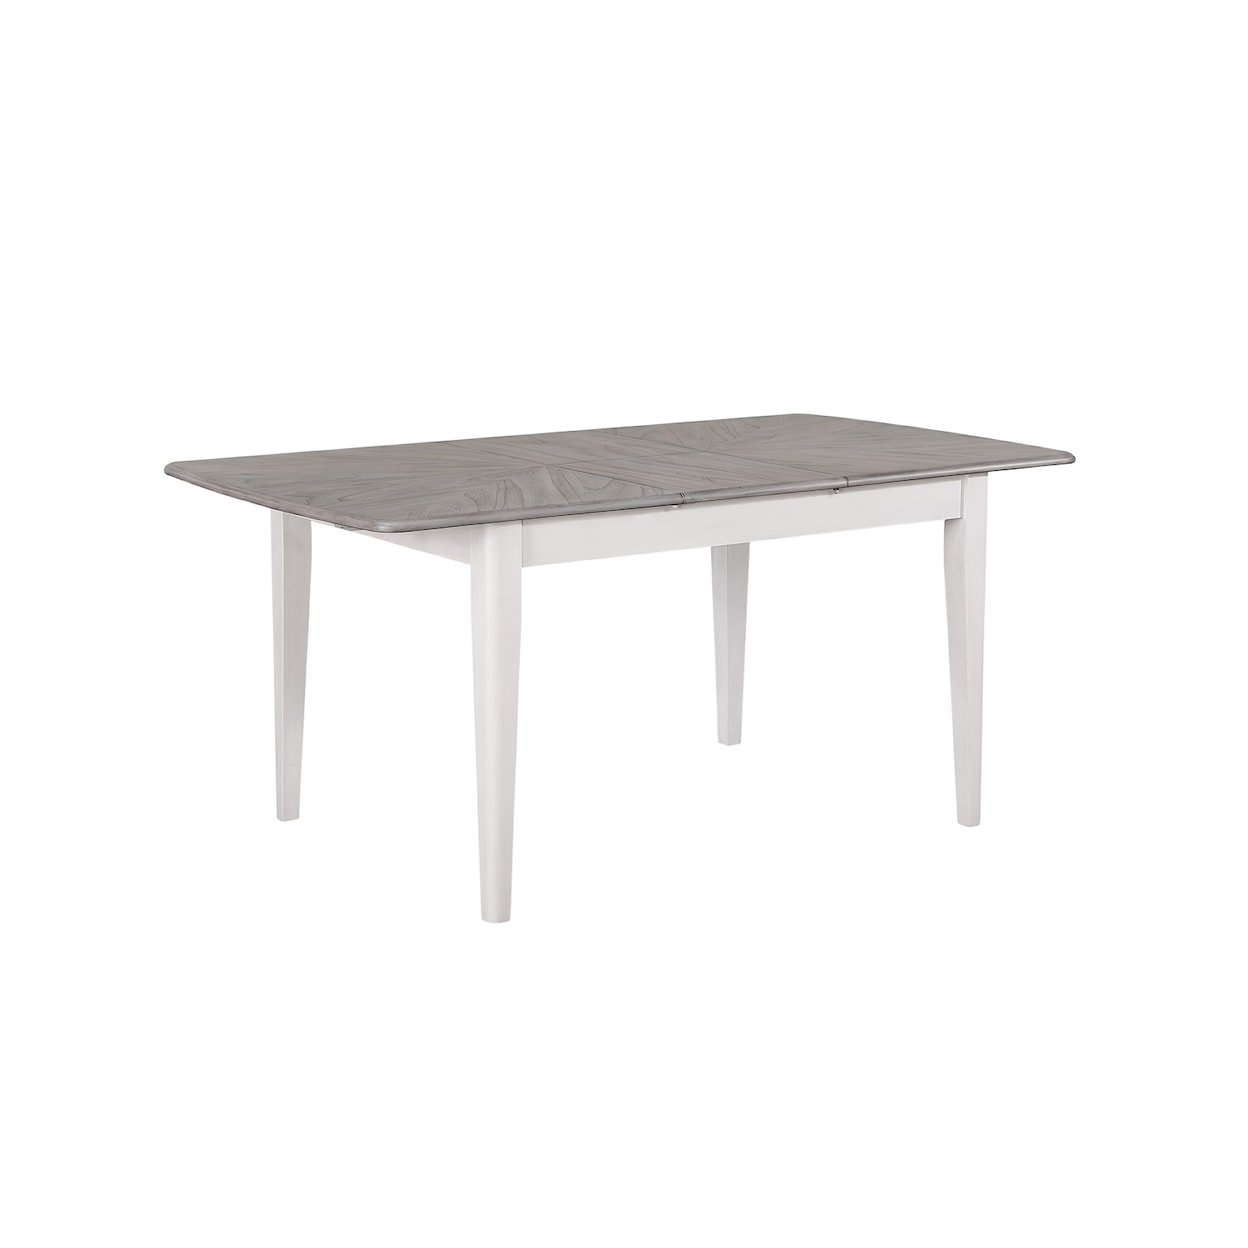 Winners Only Brantley Dining Table